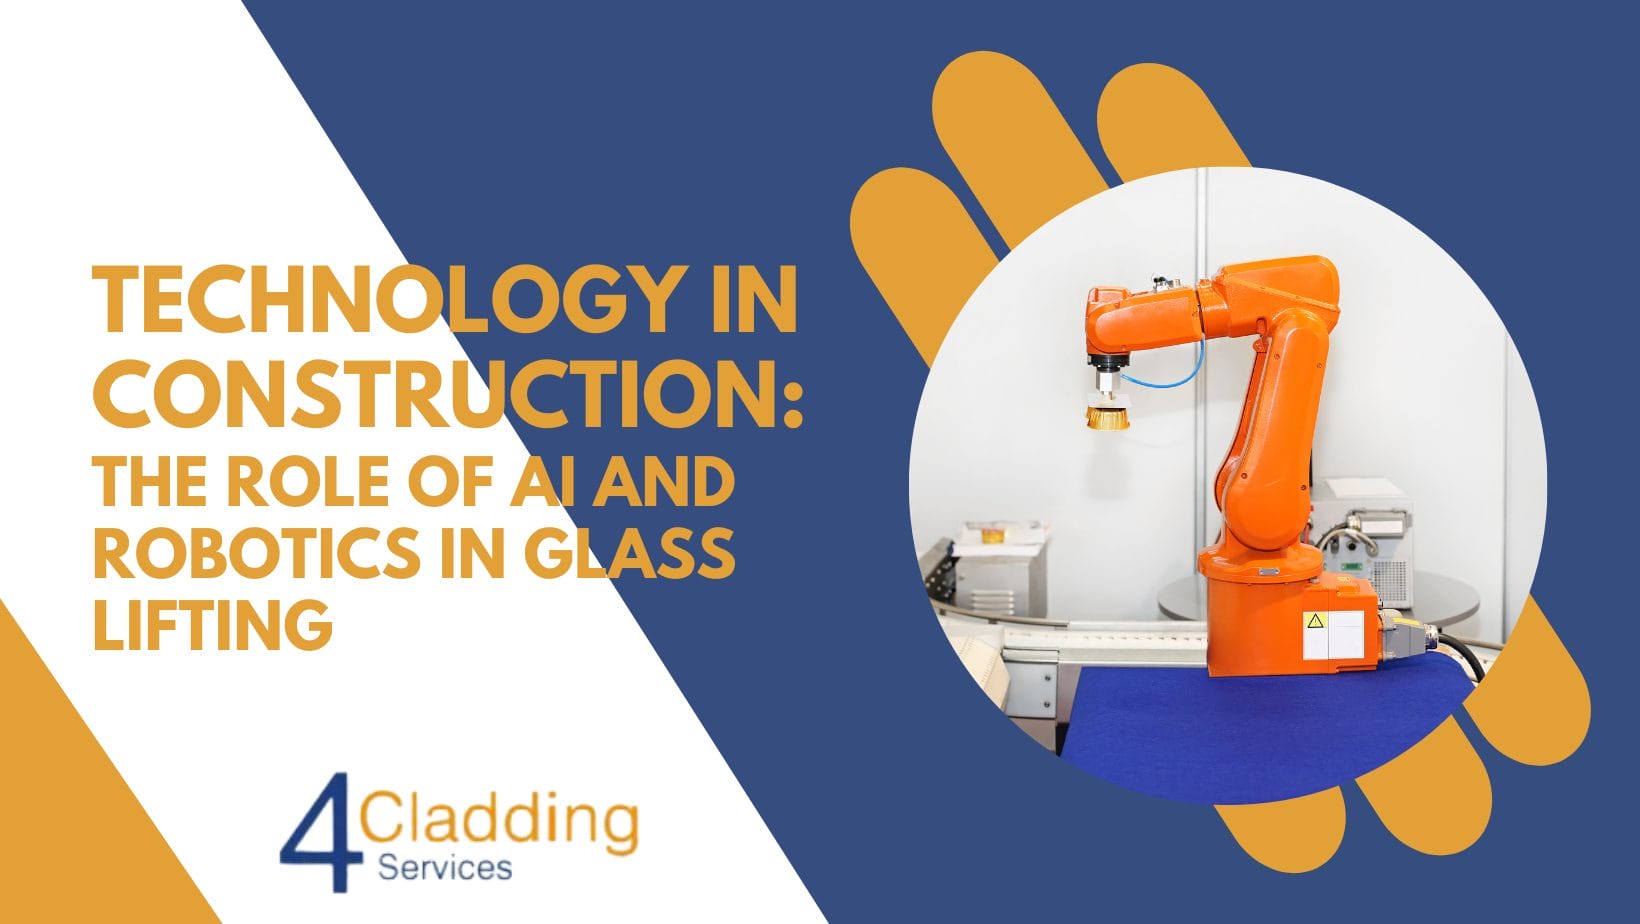 Technology in Construction: The Role of AI and Robotics in Glass Lifting